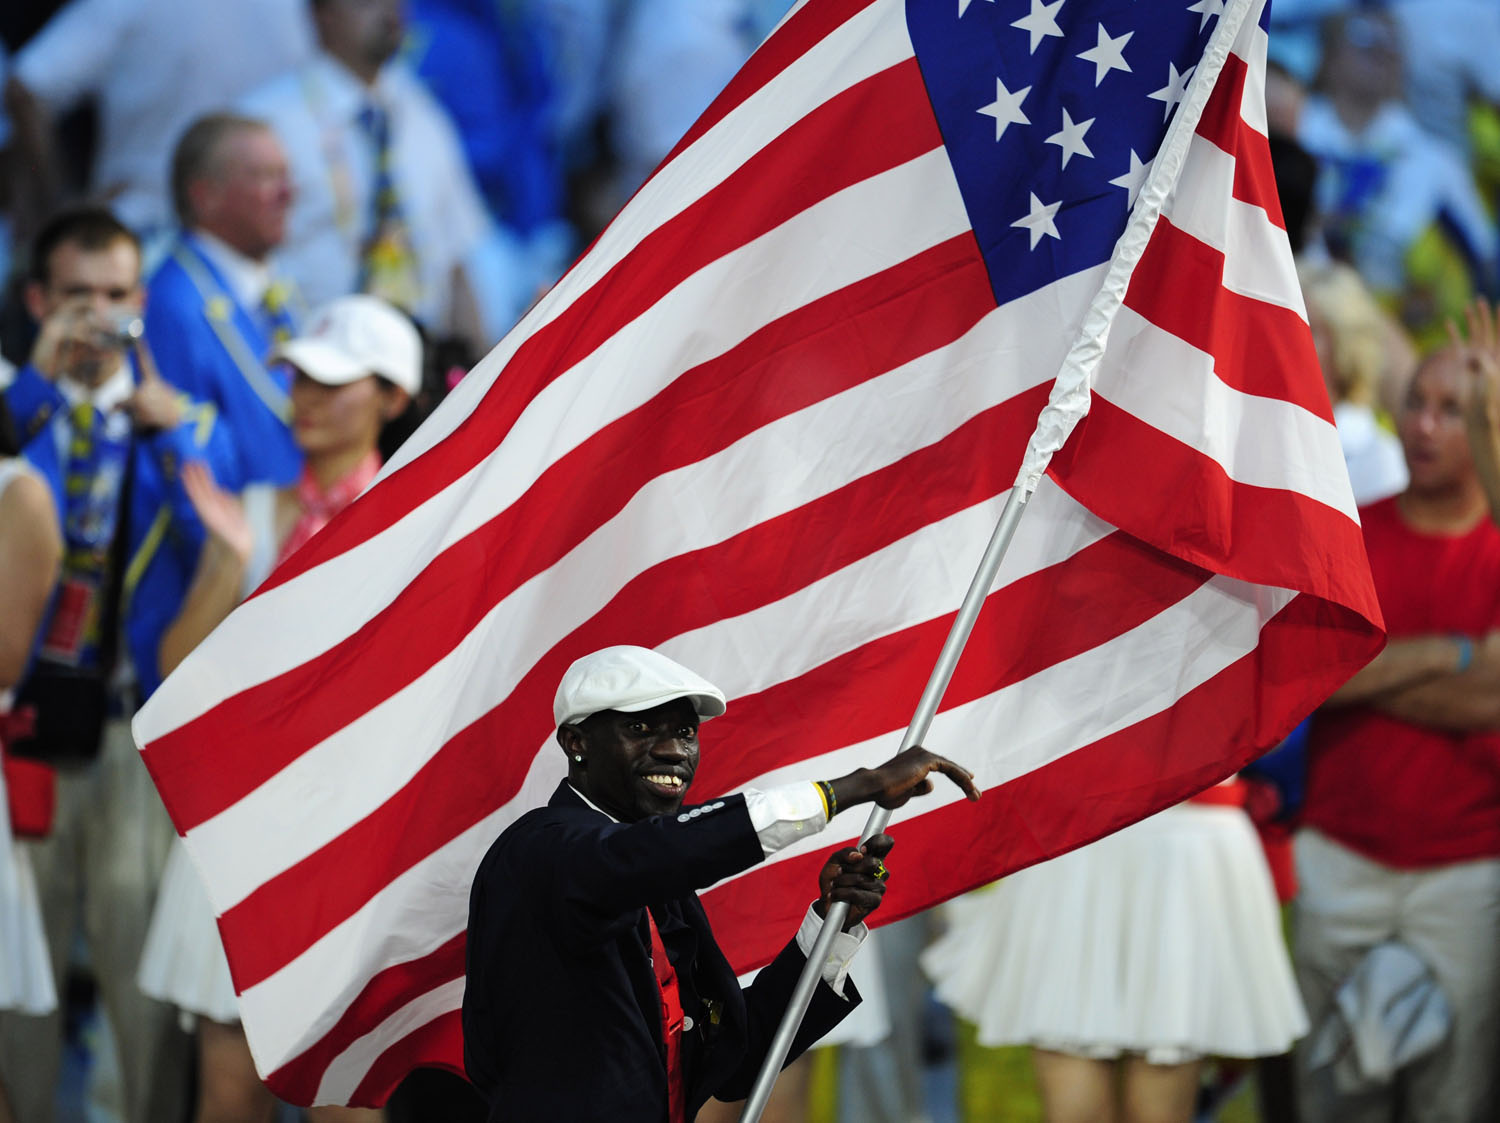 Track and Field athlete Lopez Lomong, flag-bearer of the U.S. Olympic team, marches during the opening ceremony of the Beijing 2008 Olympic Games.